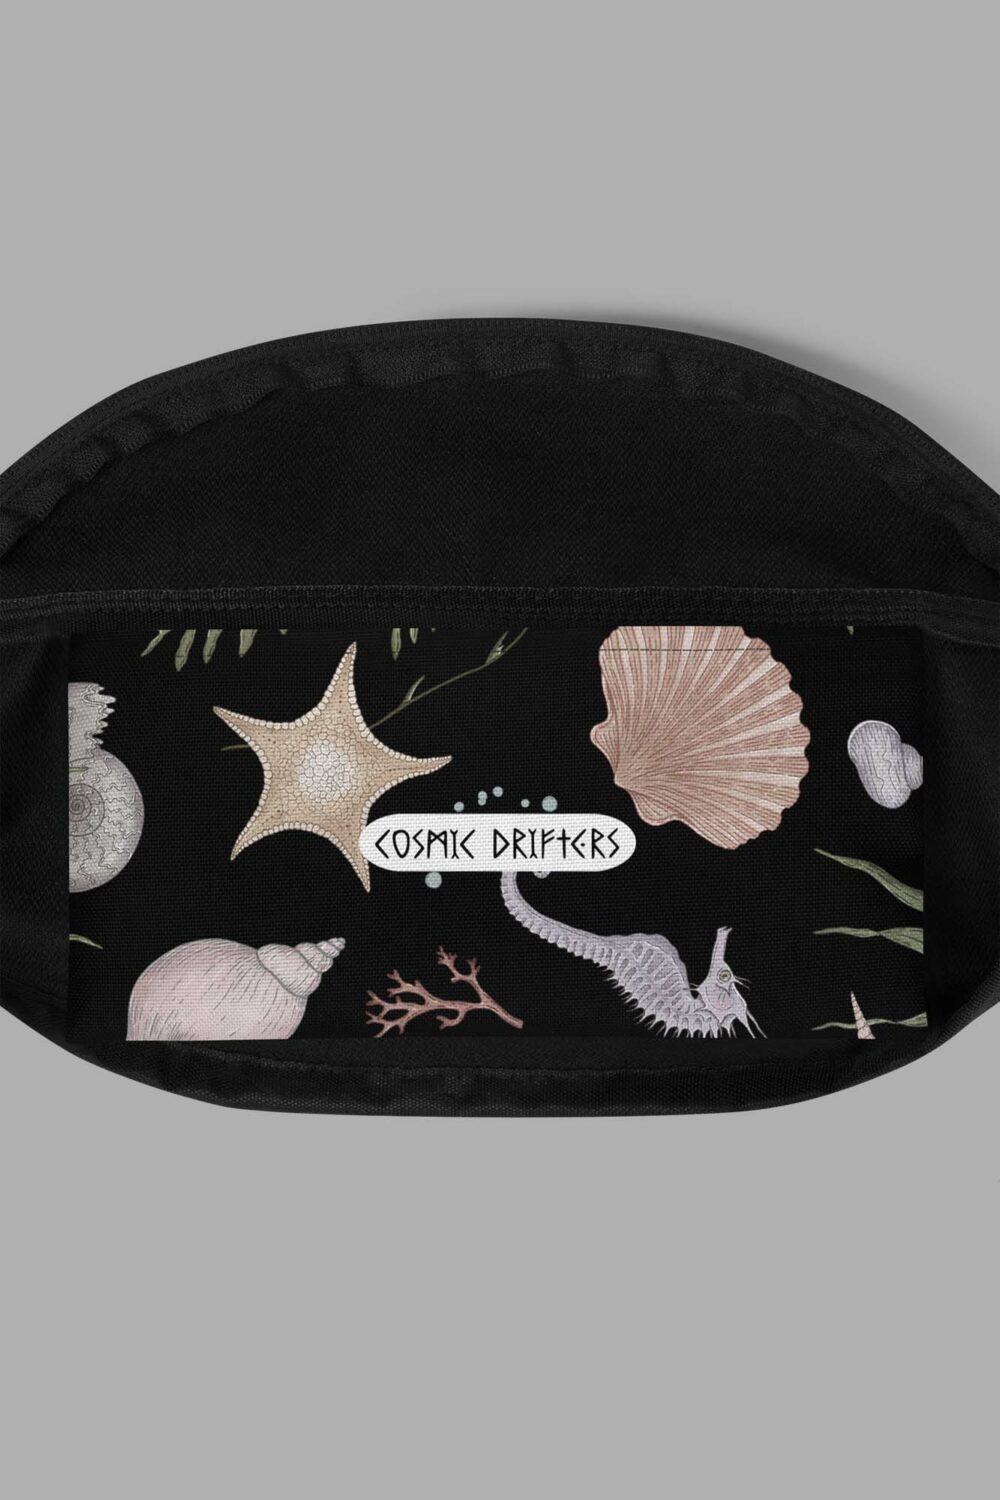 sea witch print fanny pack